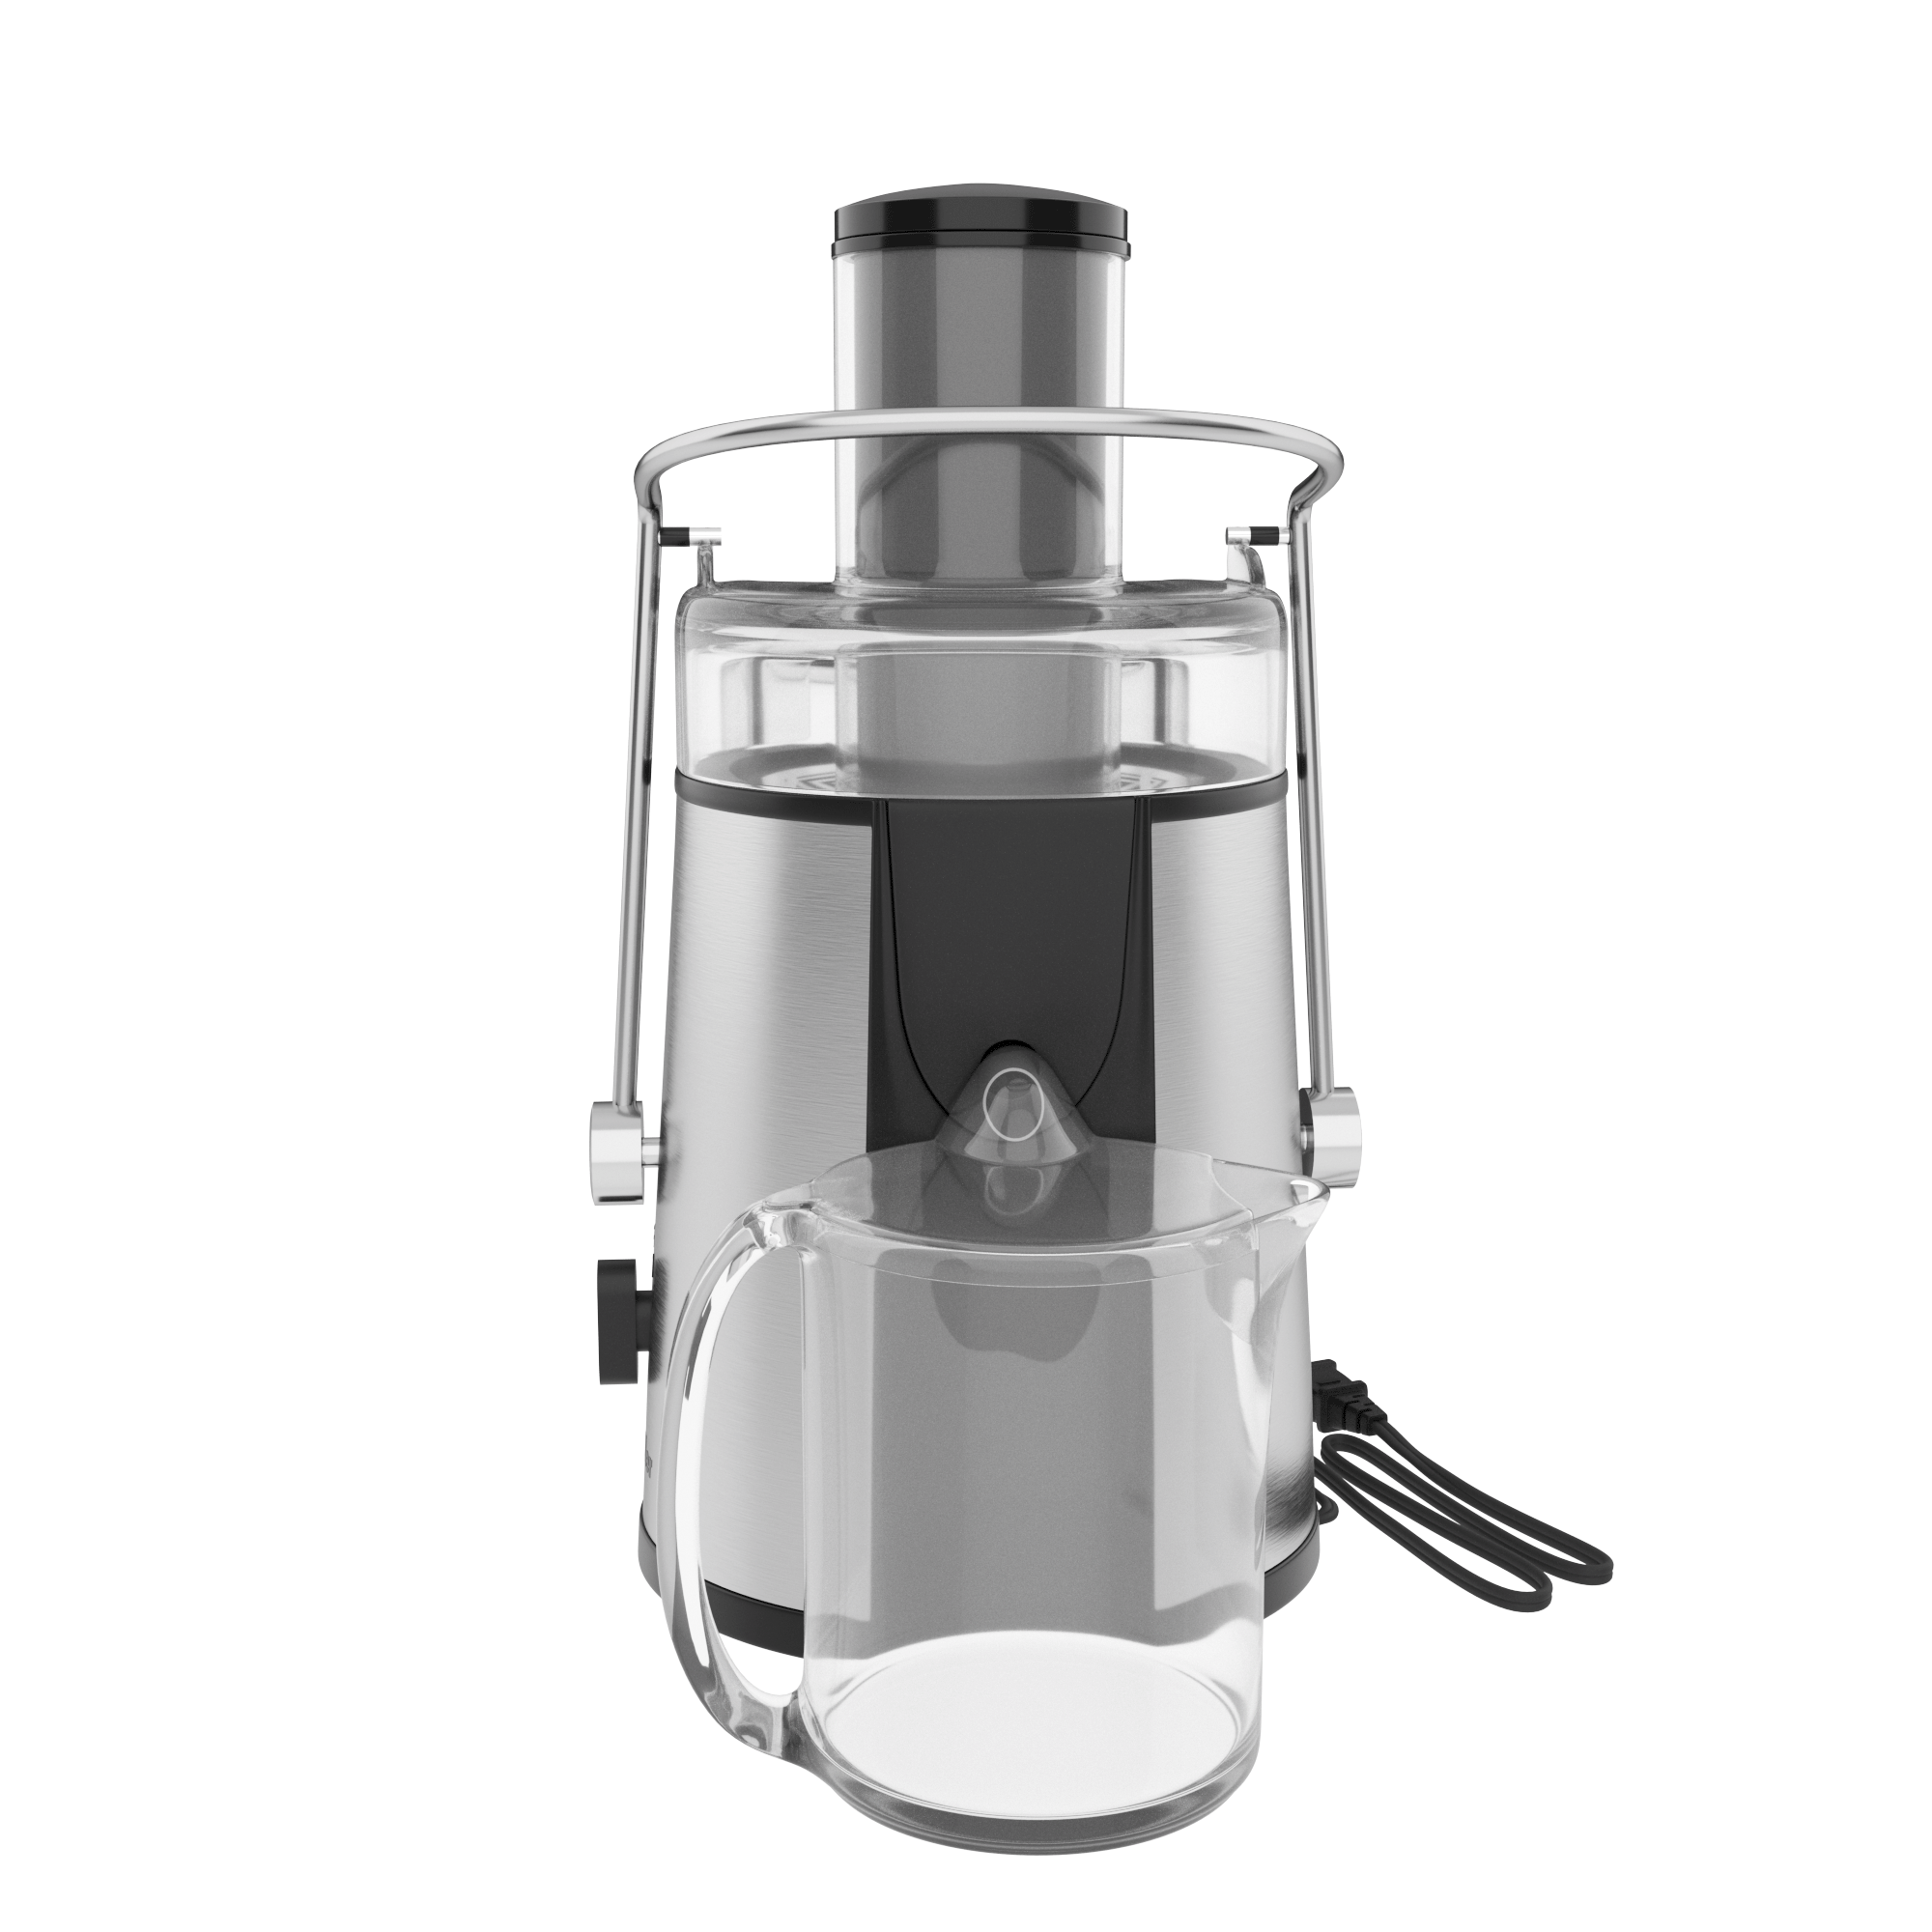 Mueller Austria Juicer Ultra 1100W Power, Easy Clean Extractor Press  Centrifugal Juicing Machine, Wide 3 Feed Chute for Whole Fruit Vegetable,  Anti-drip, High Quality, BPA-Free, Large, Silver (powers on) Auction